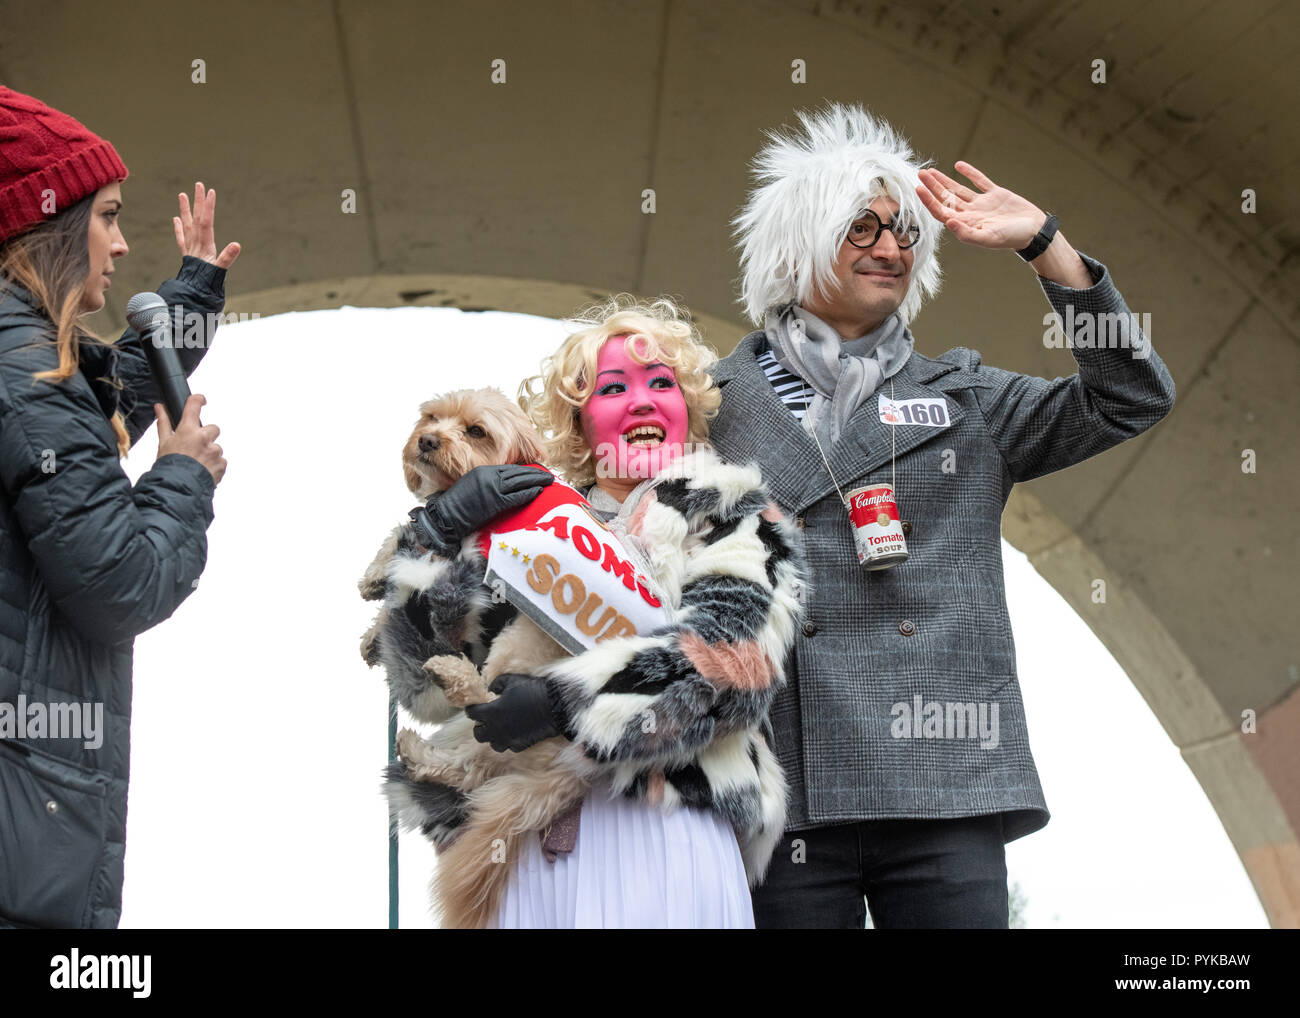 New York, USA,28 October 2018.  A dog wearing a Campbell Soup outfit with its owners dressed as Andy Warhol and Marilyn wave from the stage during the 28th Annual Tompkins Square Halloween dog parade in New York city. Credit: Enrique Shore/Alamy Live News Stock Photo